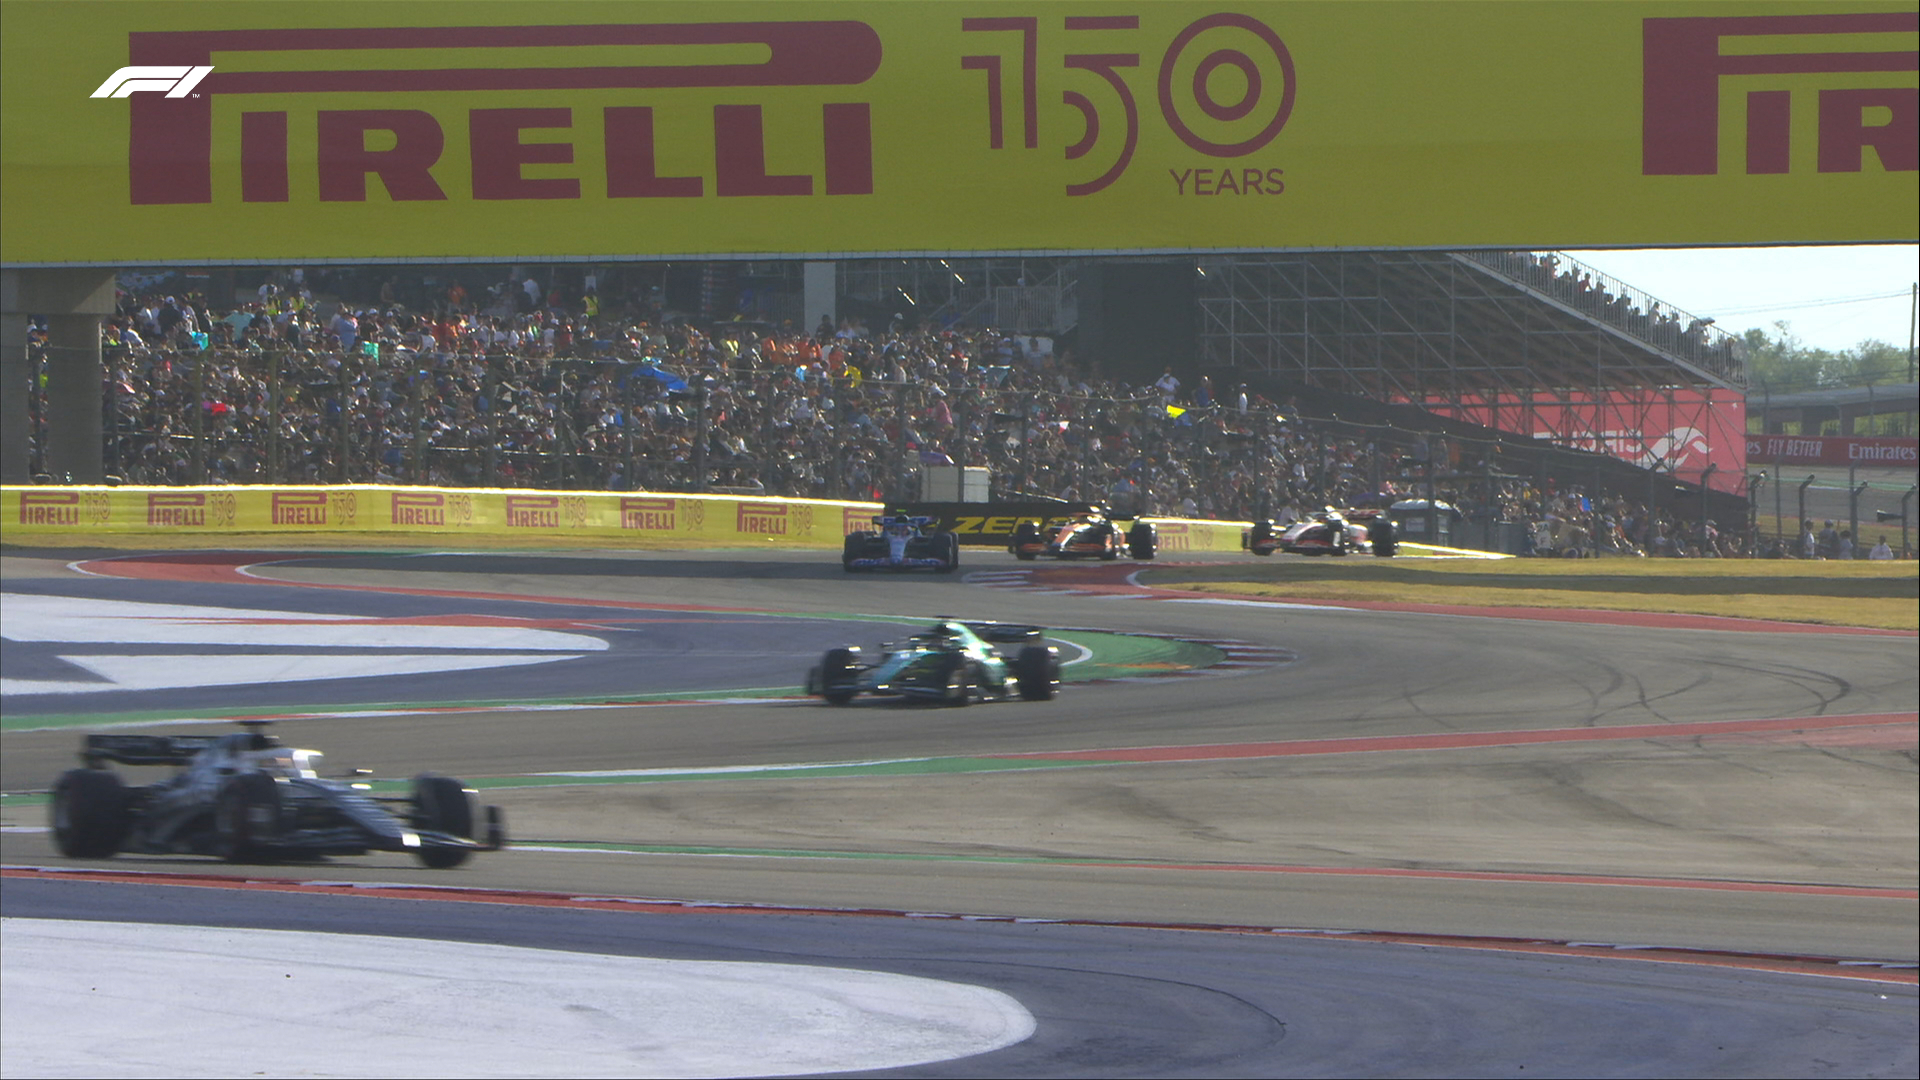 A wide angle shot of the first sector in Austin, with five cars easily seen in shot in the final moments of Q1